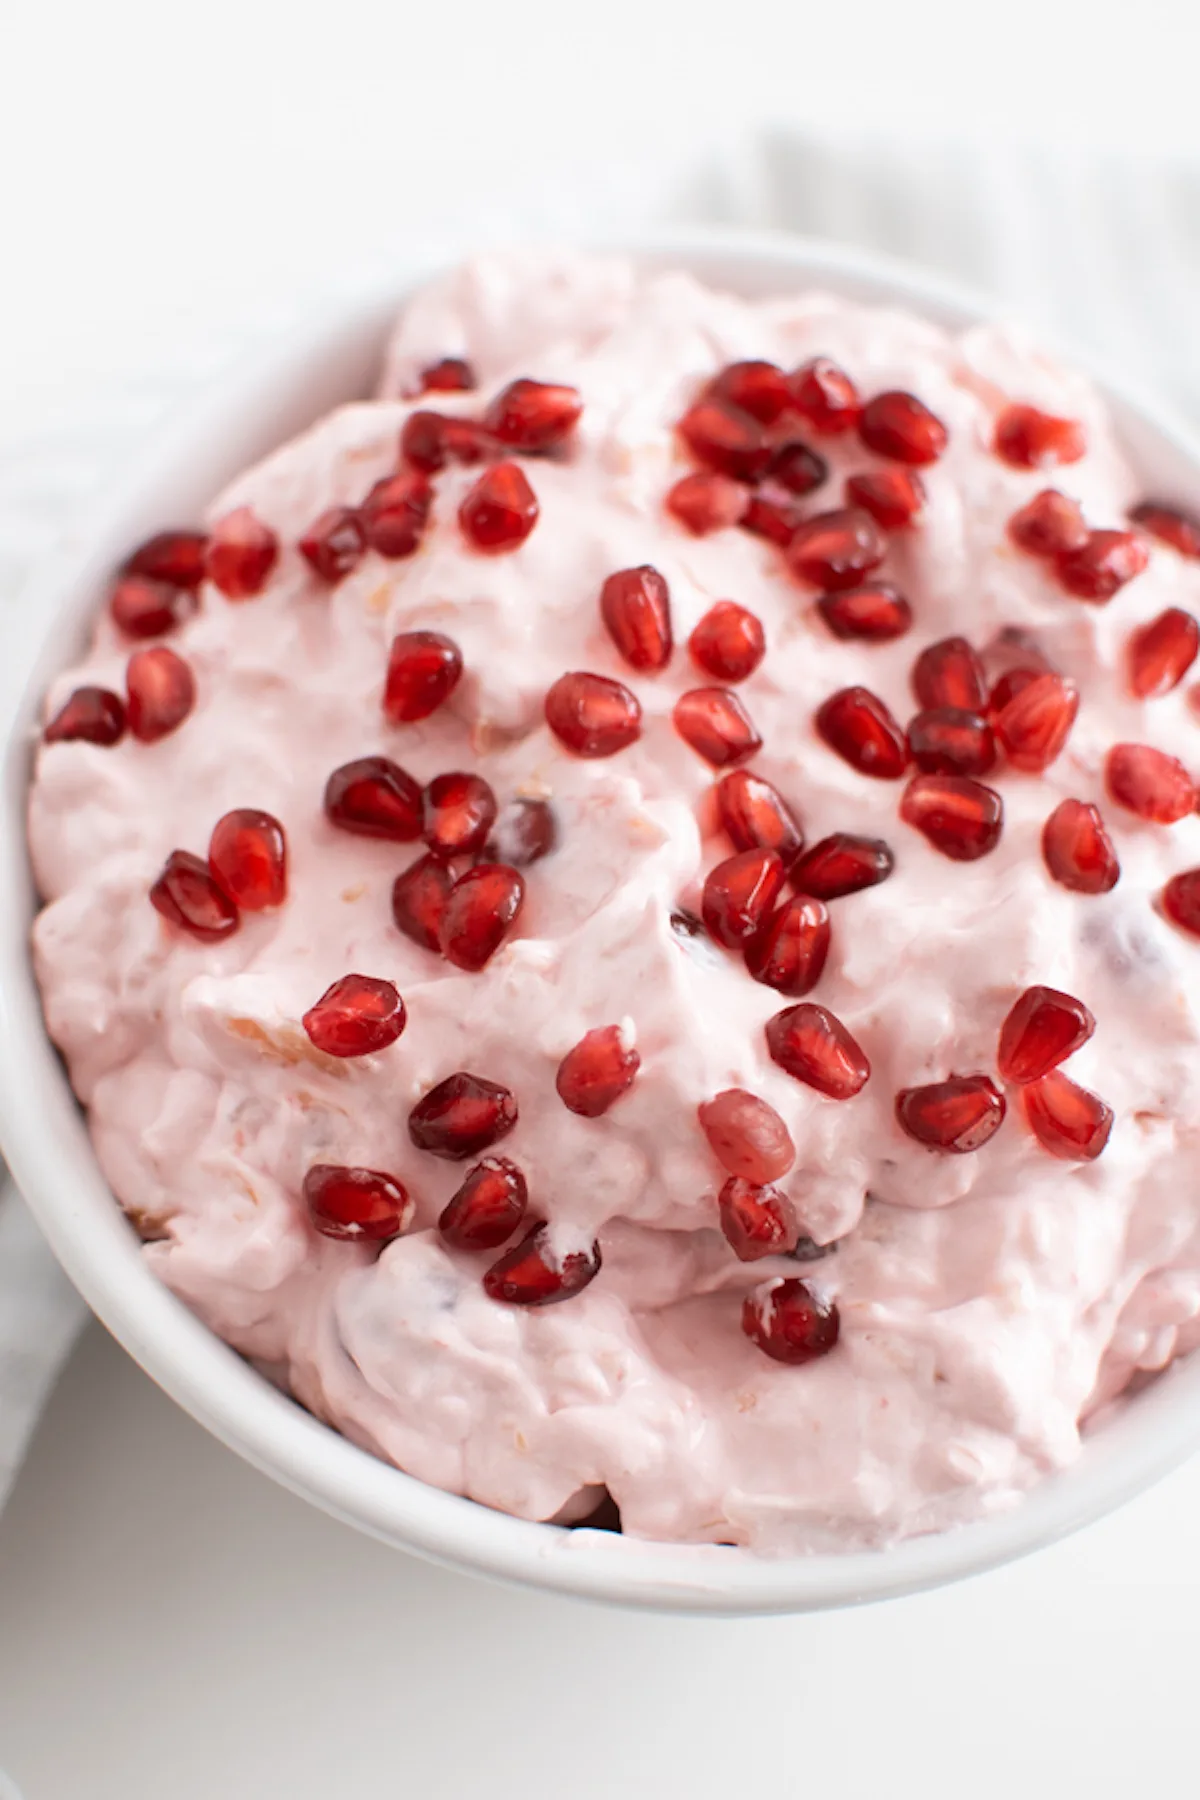 Pink fluff dessert with pomegranate arils on top in white serving bowl.